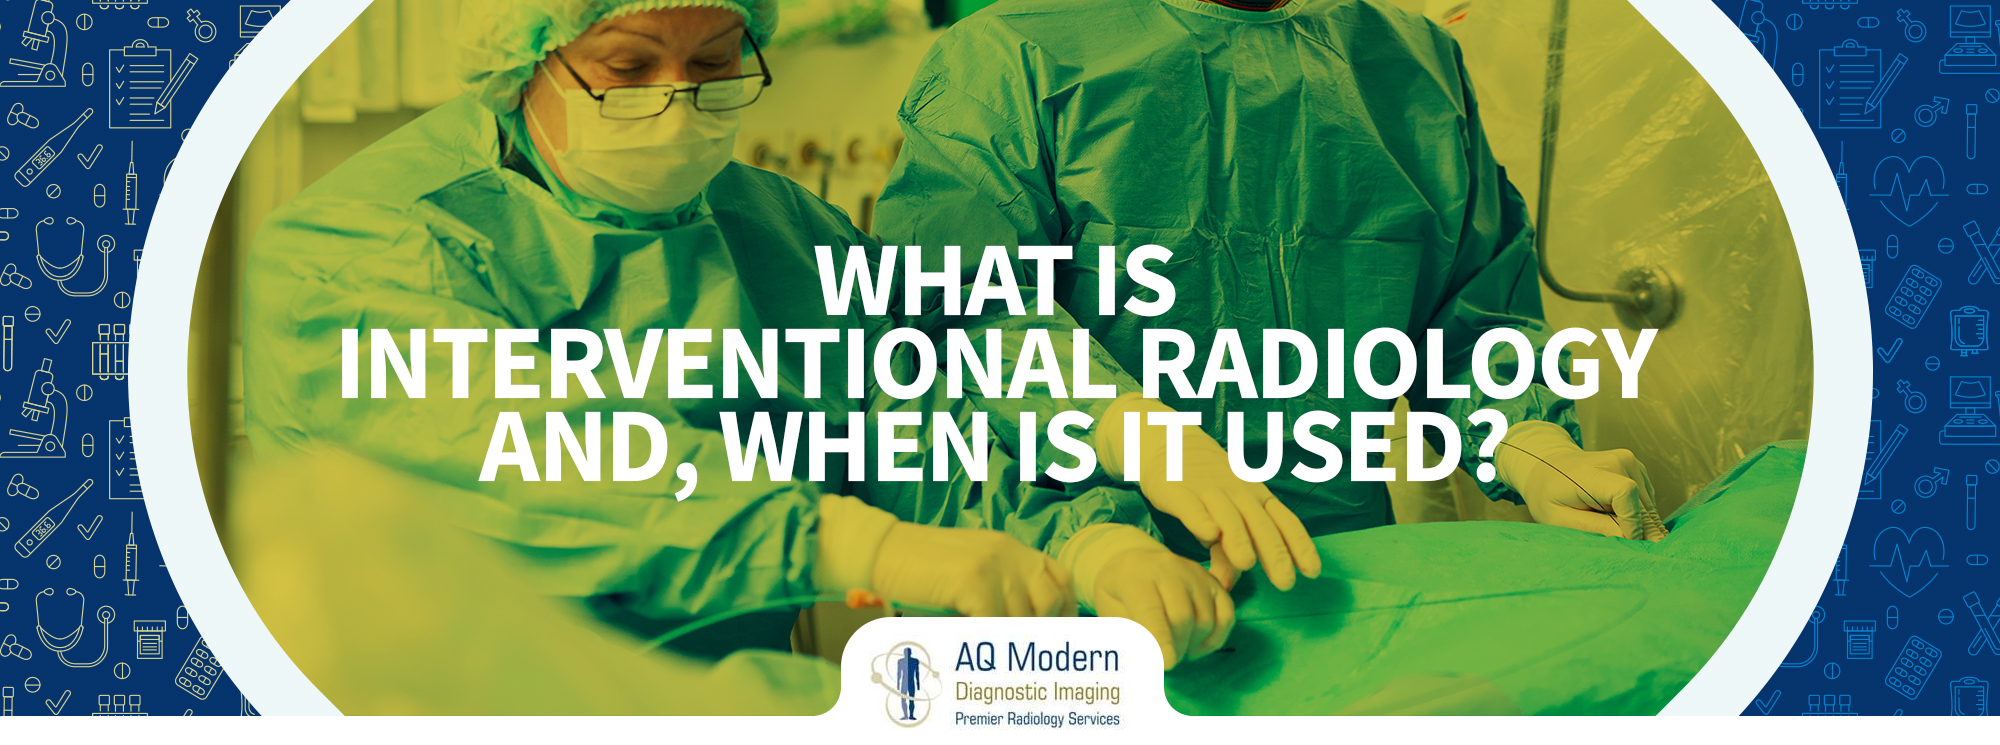 What is Interventional Radiology and When is it Used?